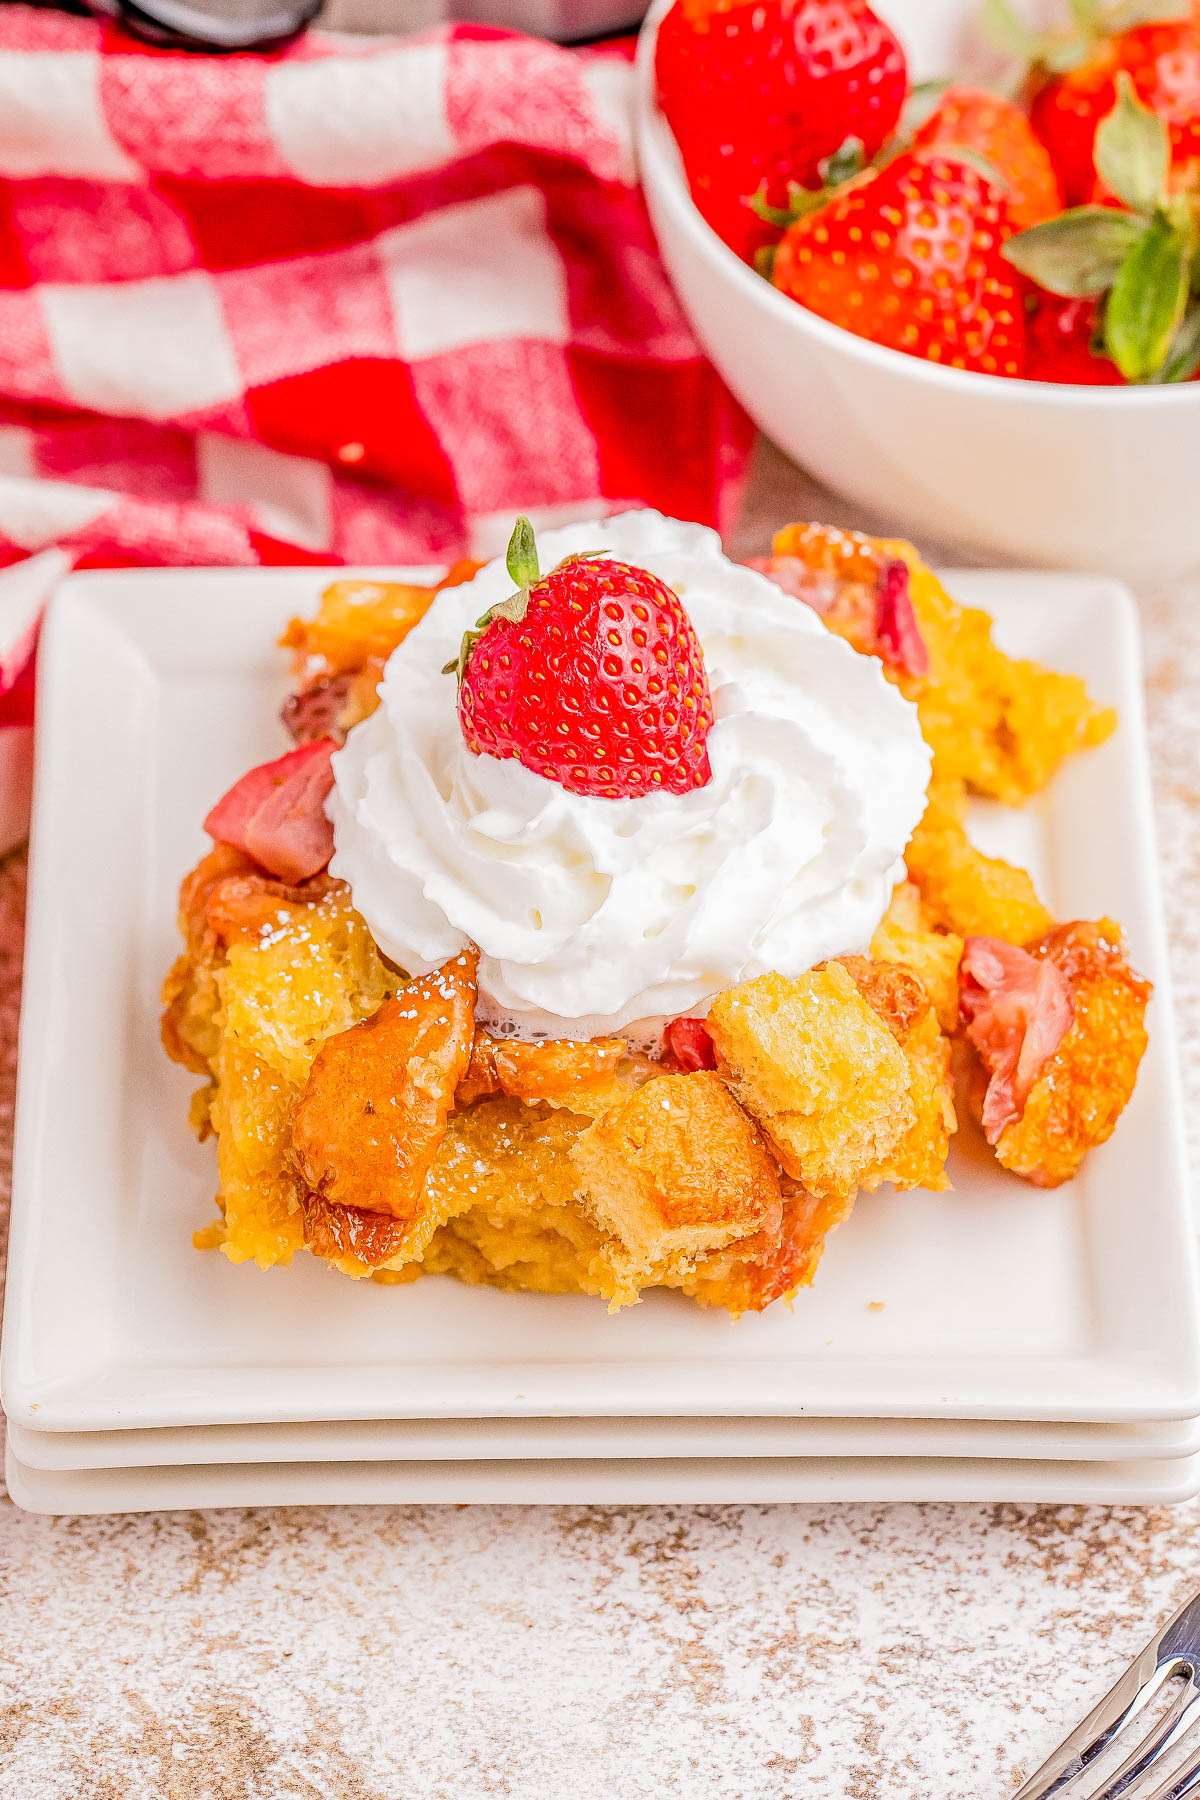 A dessert plate with a slice of bread pudding topped with whipped cream and a fresh strawberry. A bowl of strawberries and a red-and-white checkered cloth are in the background.